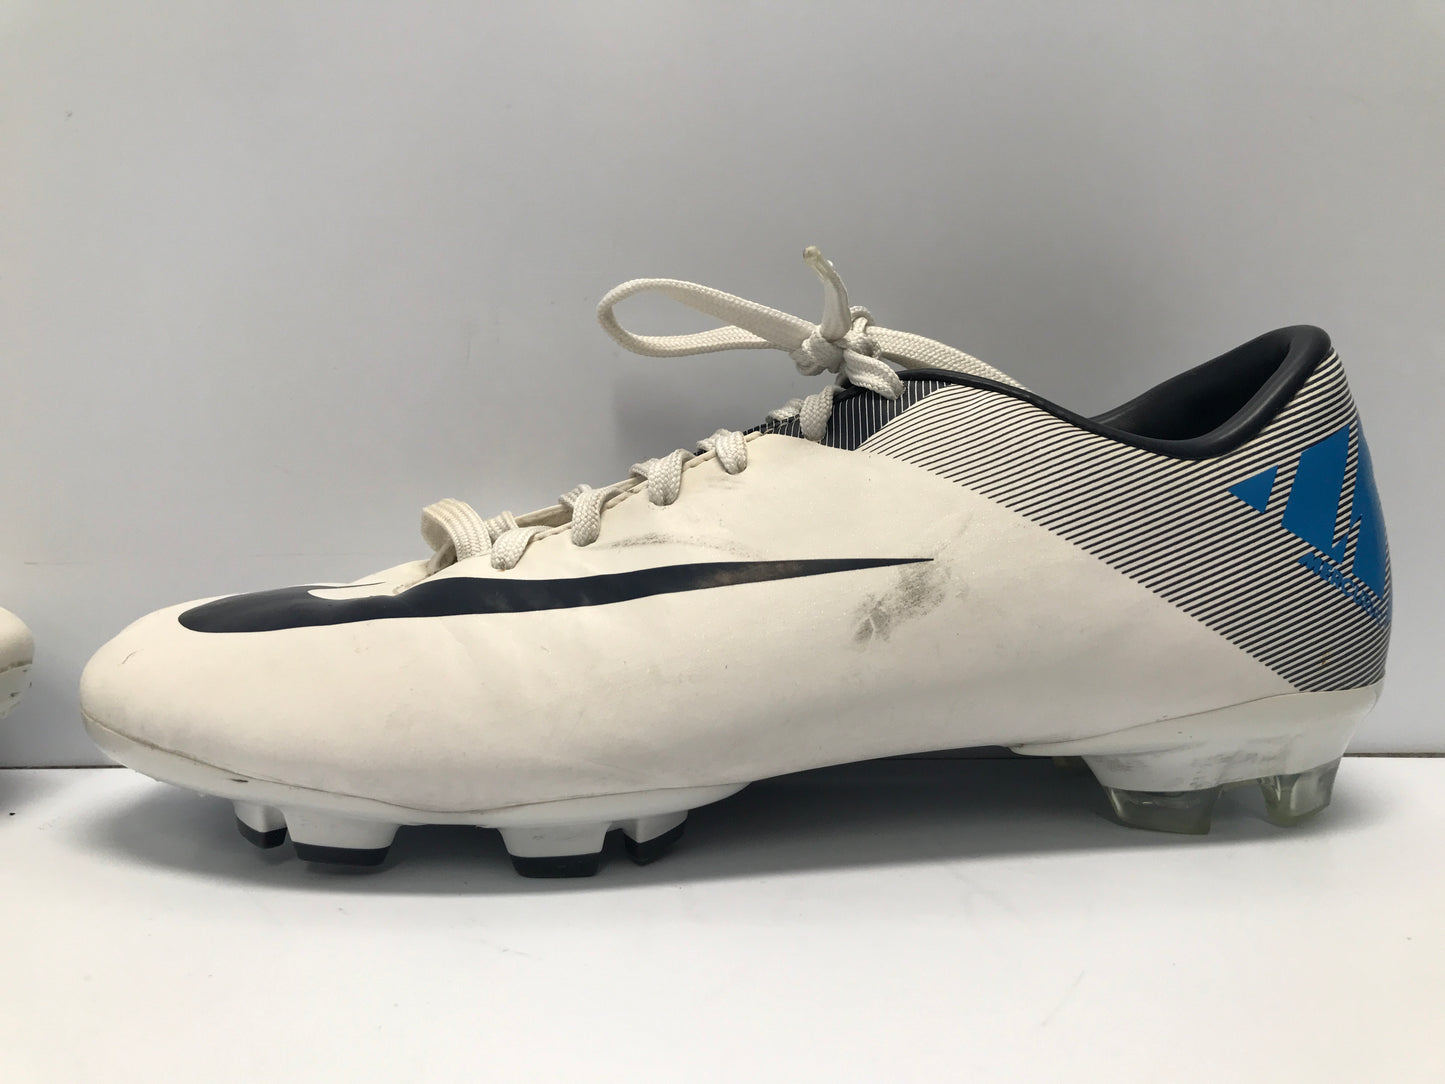 Soccer Shoes Cleats Men's Size 9.5 Nike Mercurial Blue White Navy